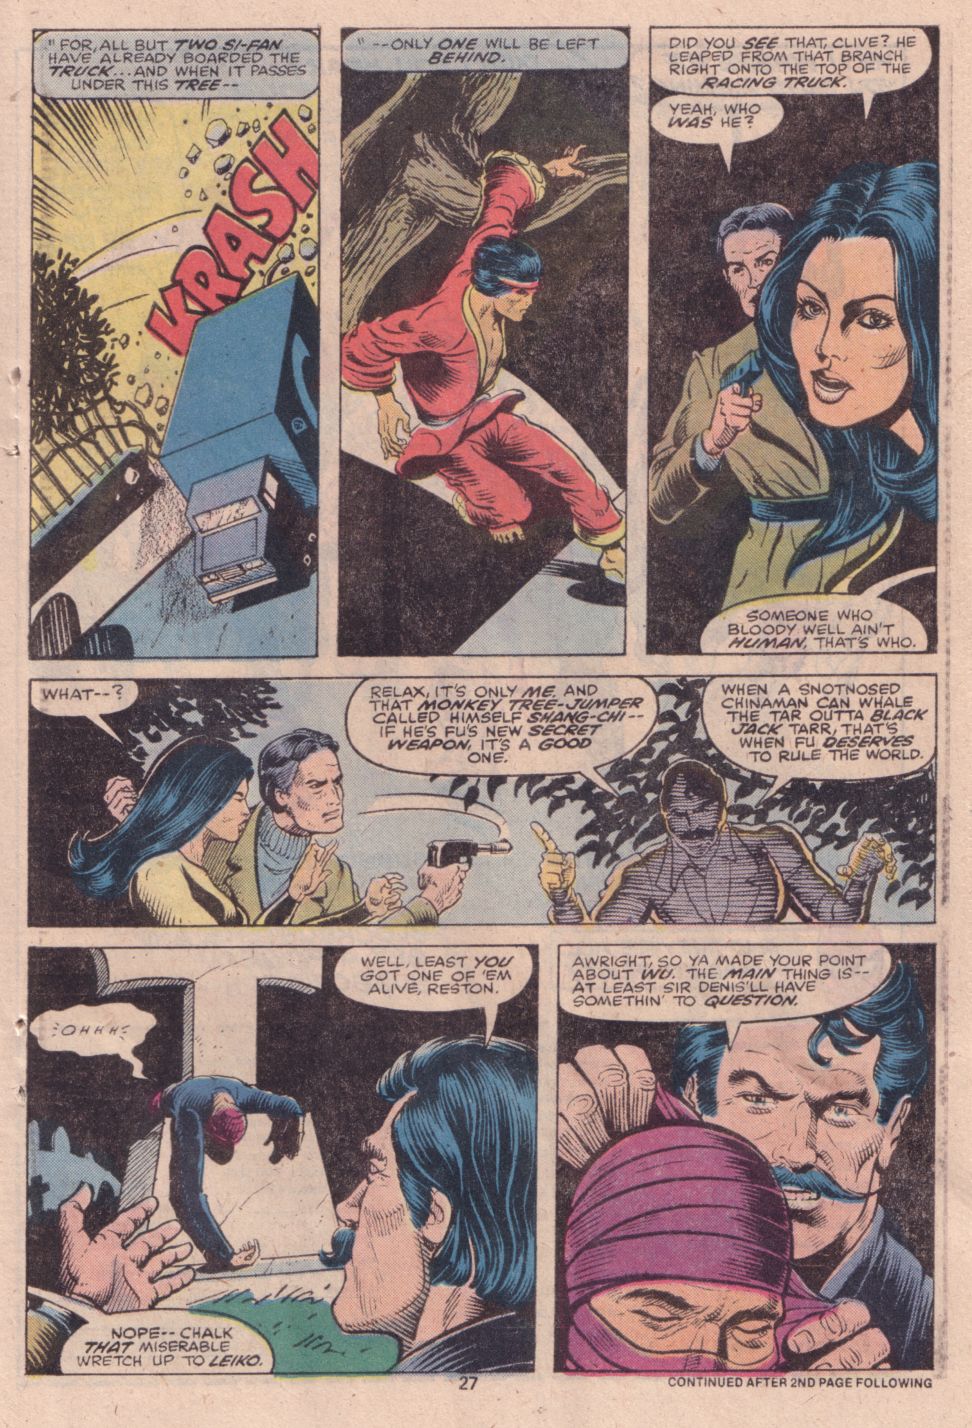 What If? (1977) issue 16 - Shang Chi Master of Kung Fu fought on The side of Fu Manchu - Page 22